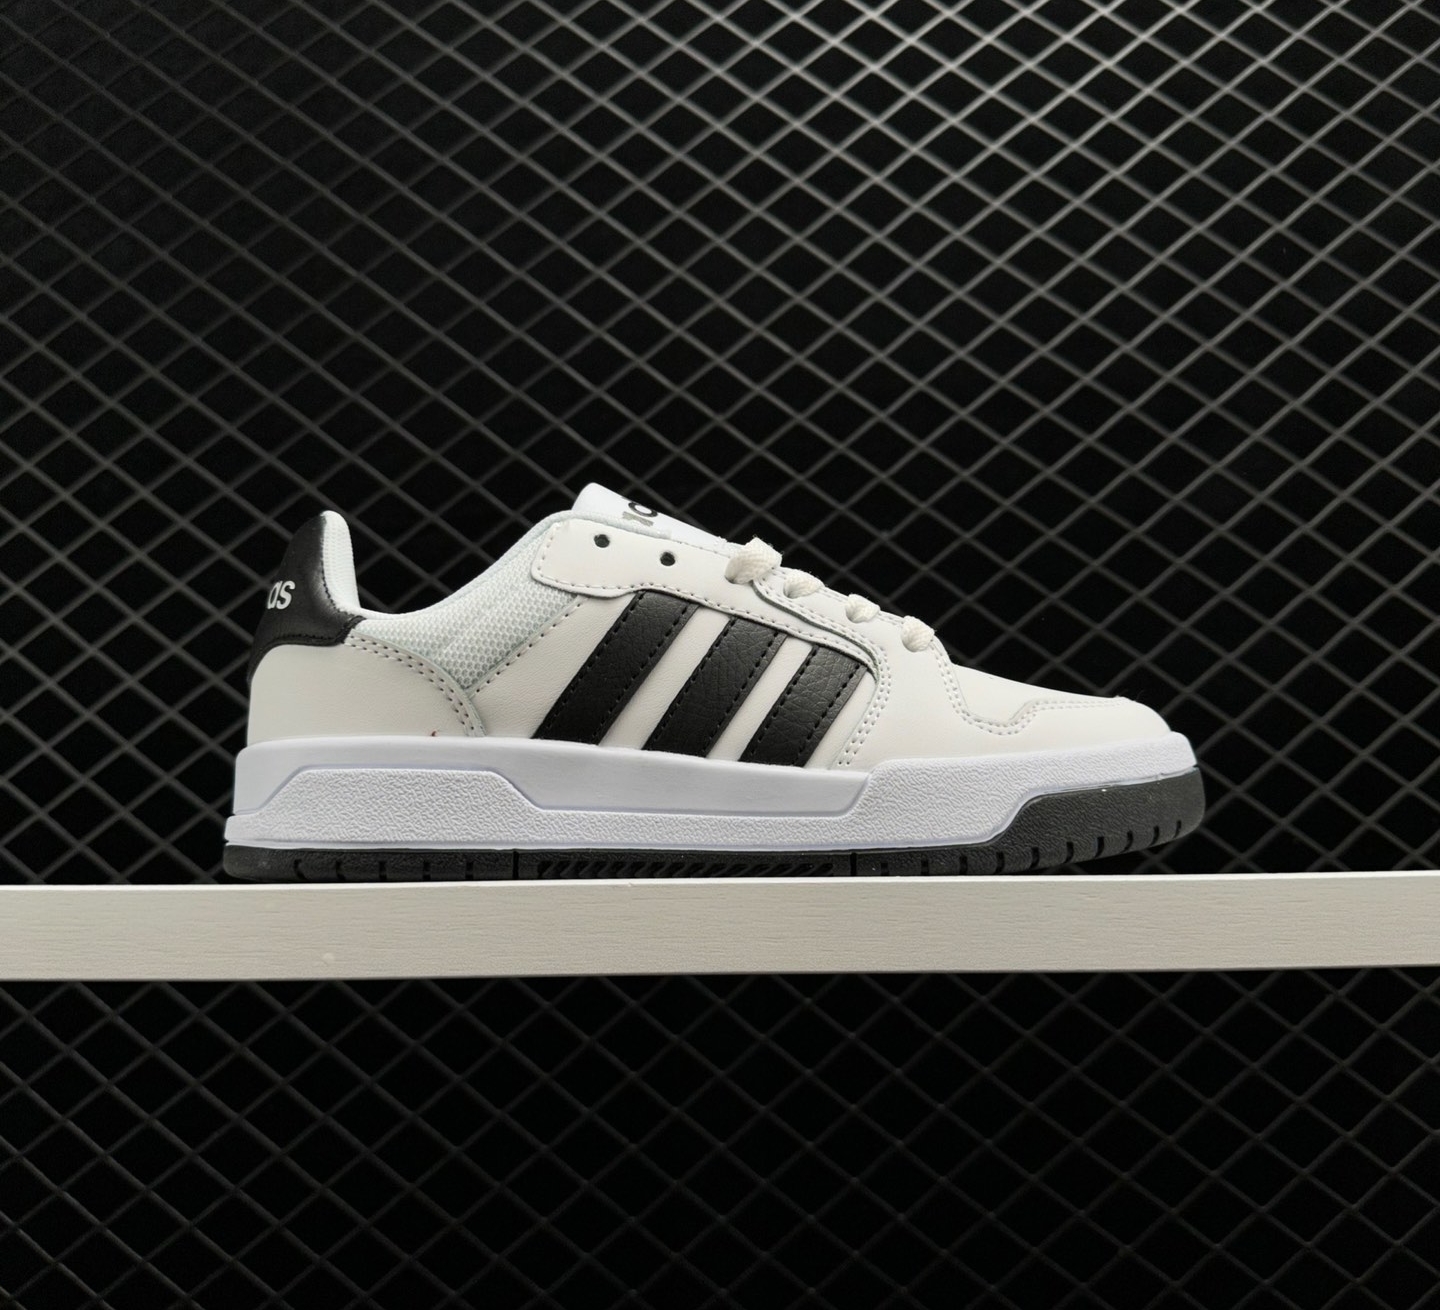 Adidas Neo Entrap White Black - Stylish and Modern Sneakers for Men and Women